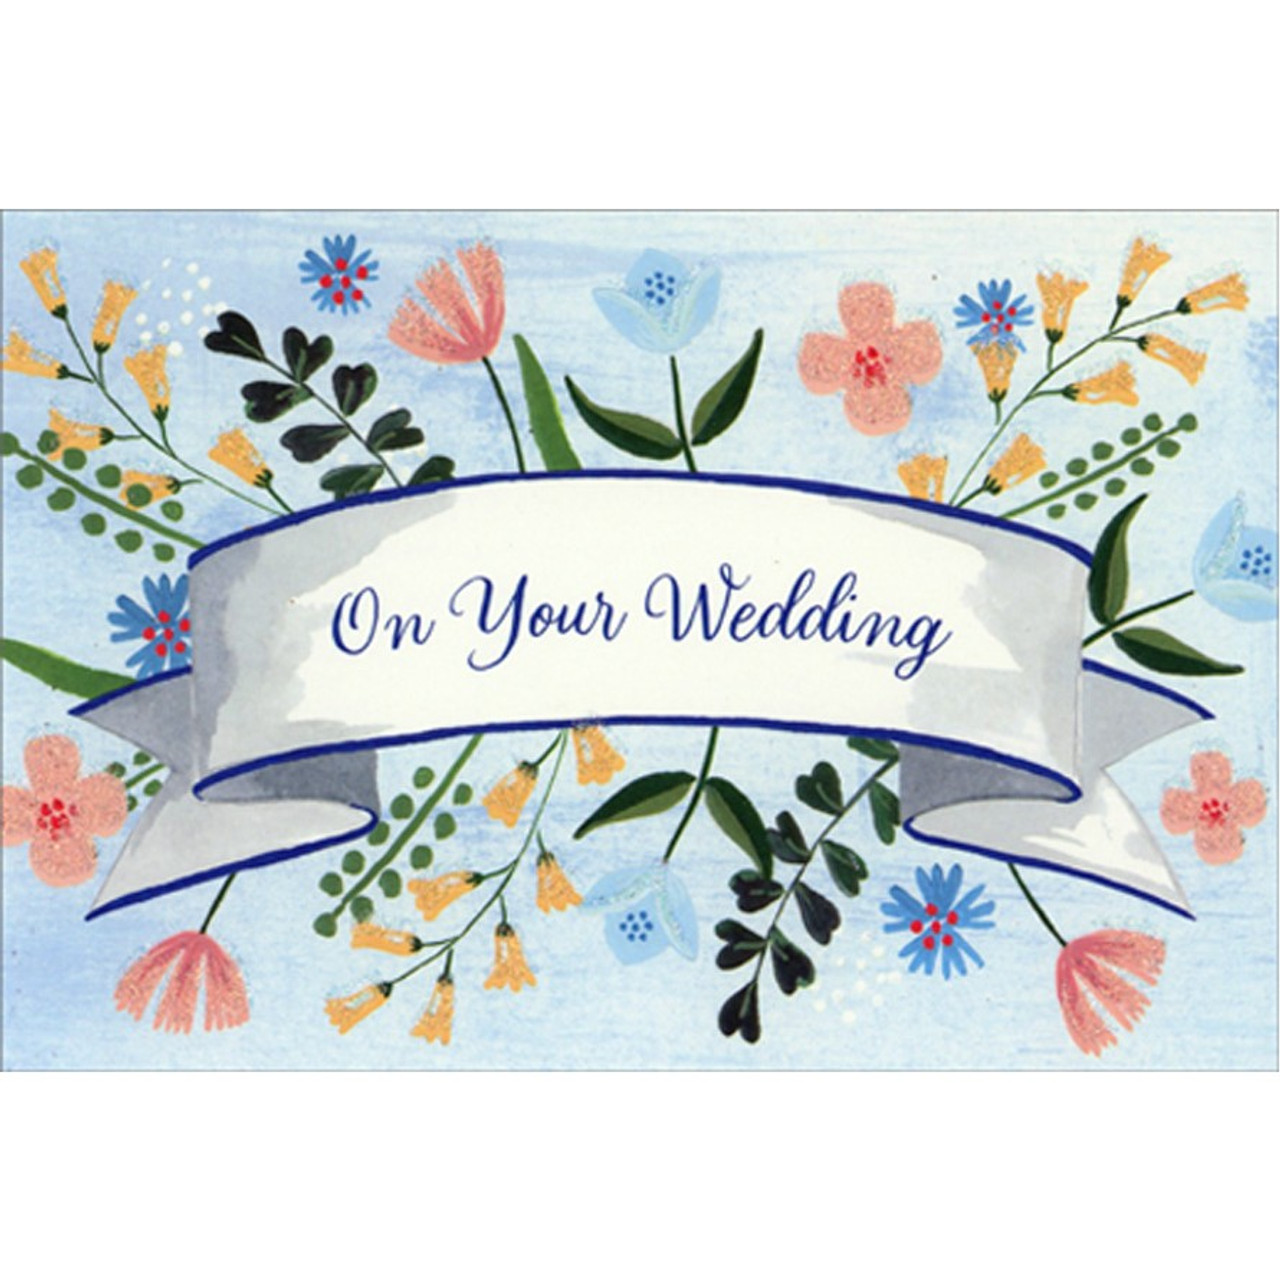 On Your Wedding Banner : Flowers and Vines Wedding Congratulations ...